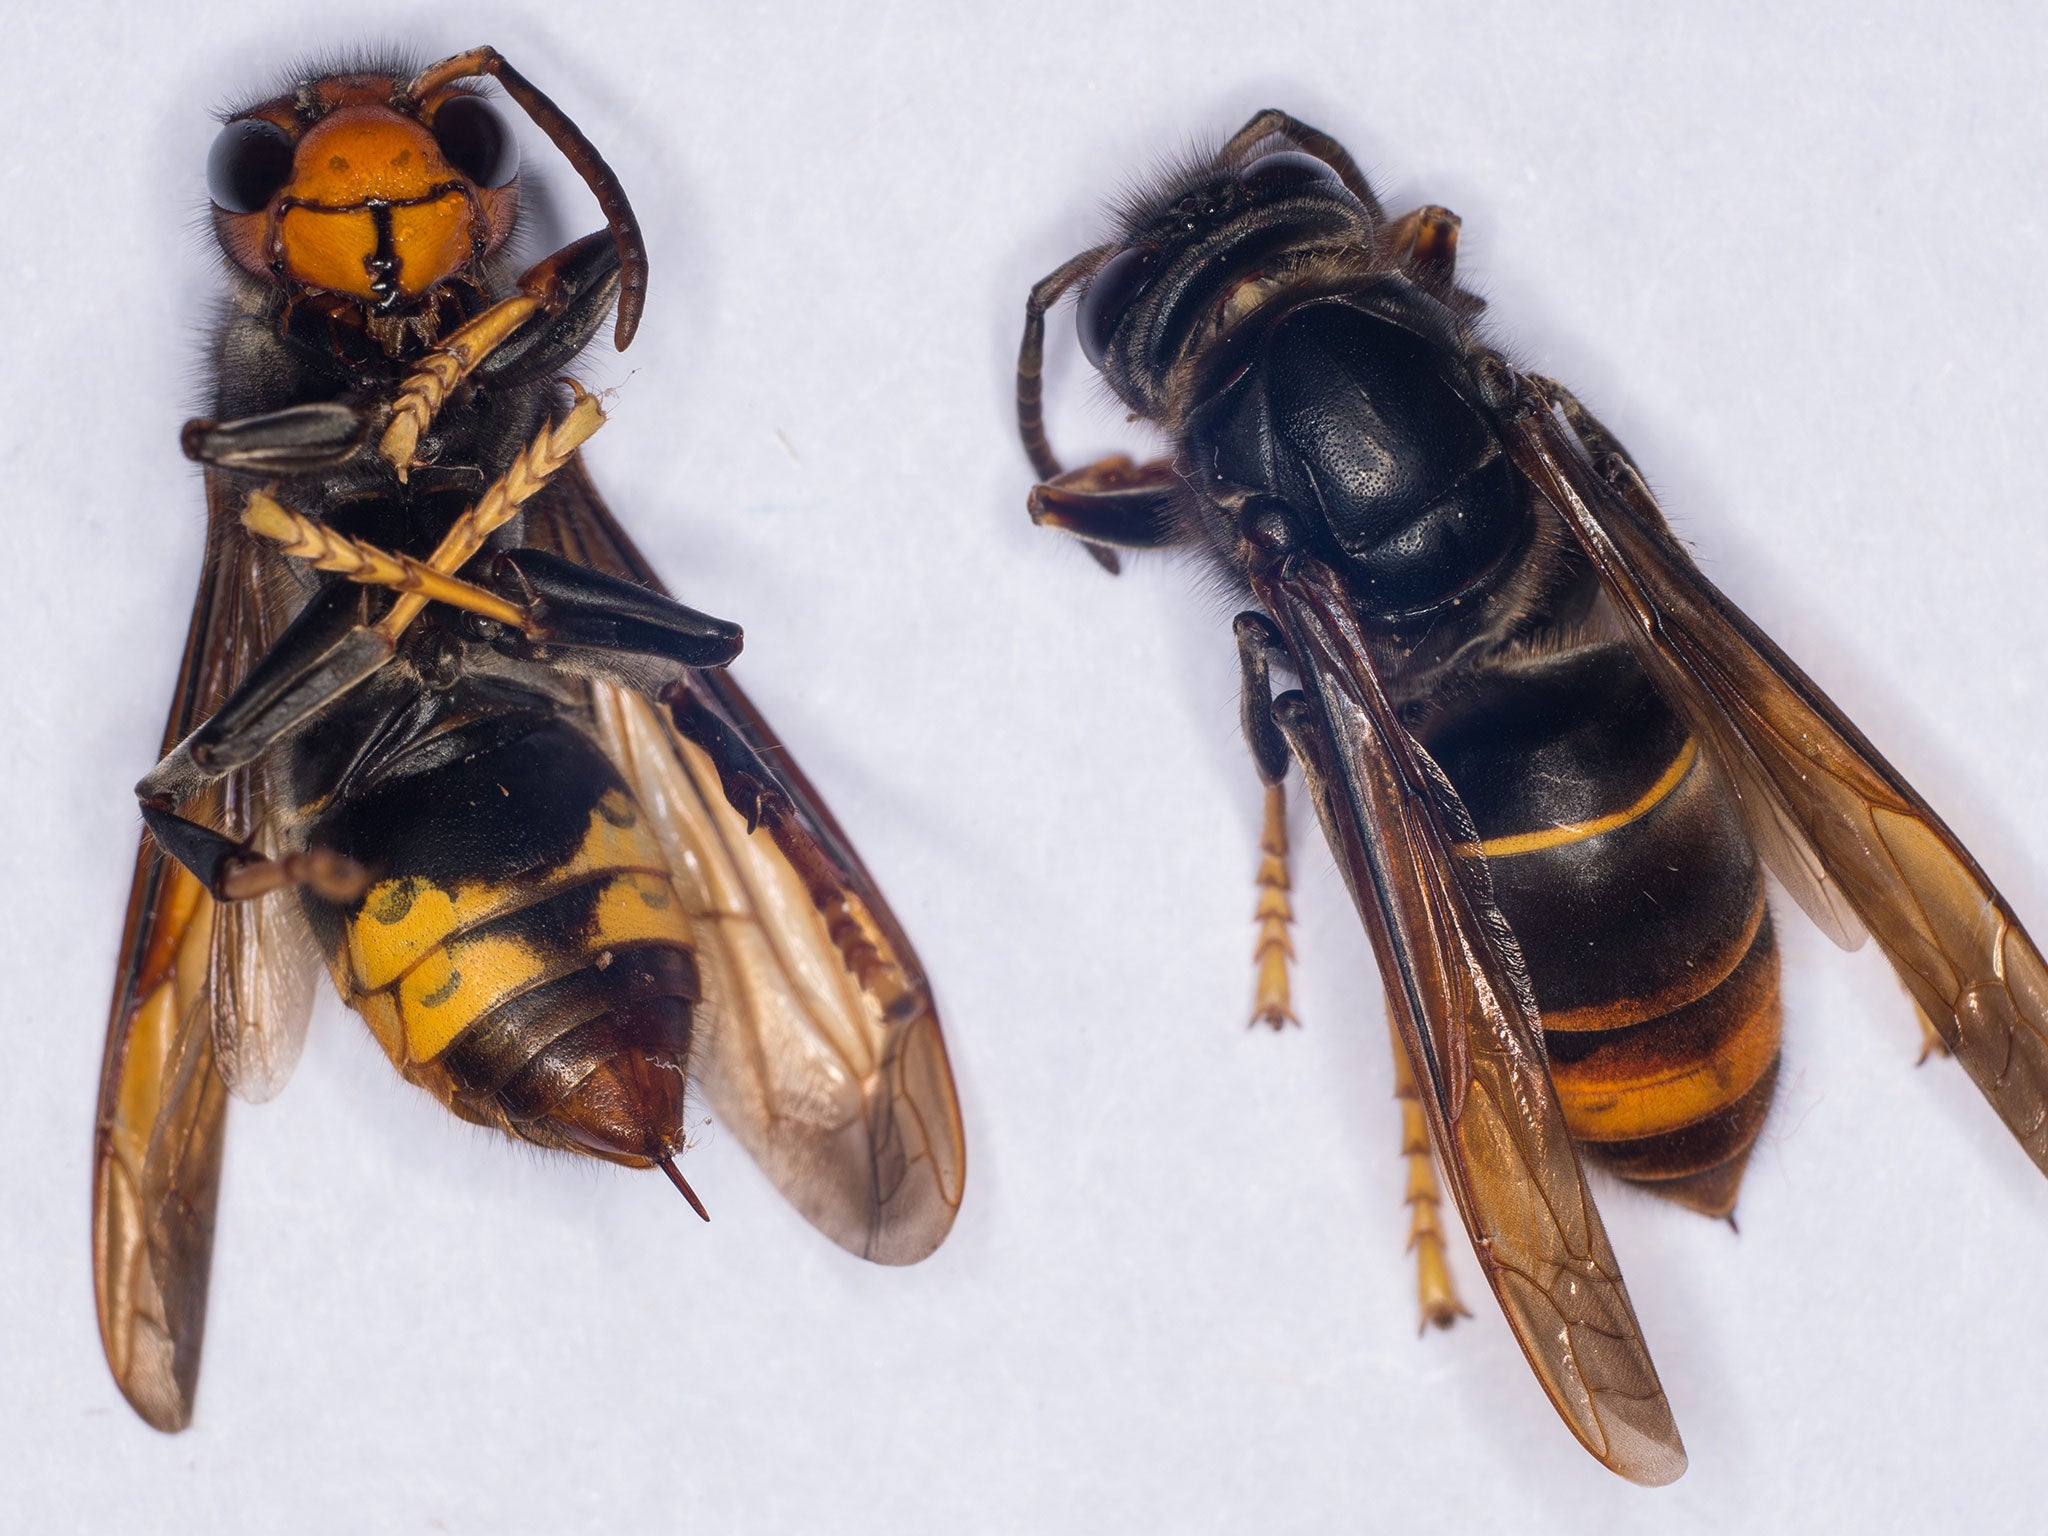 A female Asian Hornet (Vespa velutina) with its sting